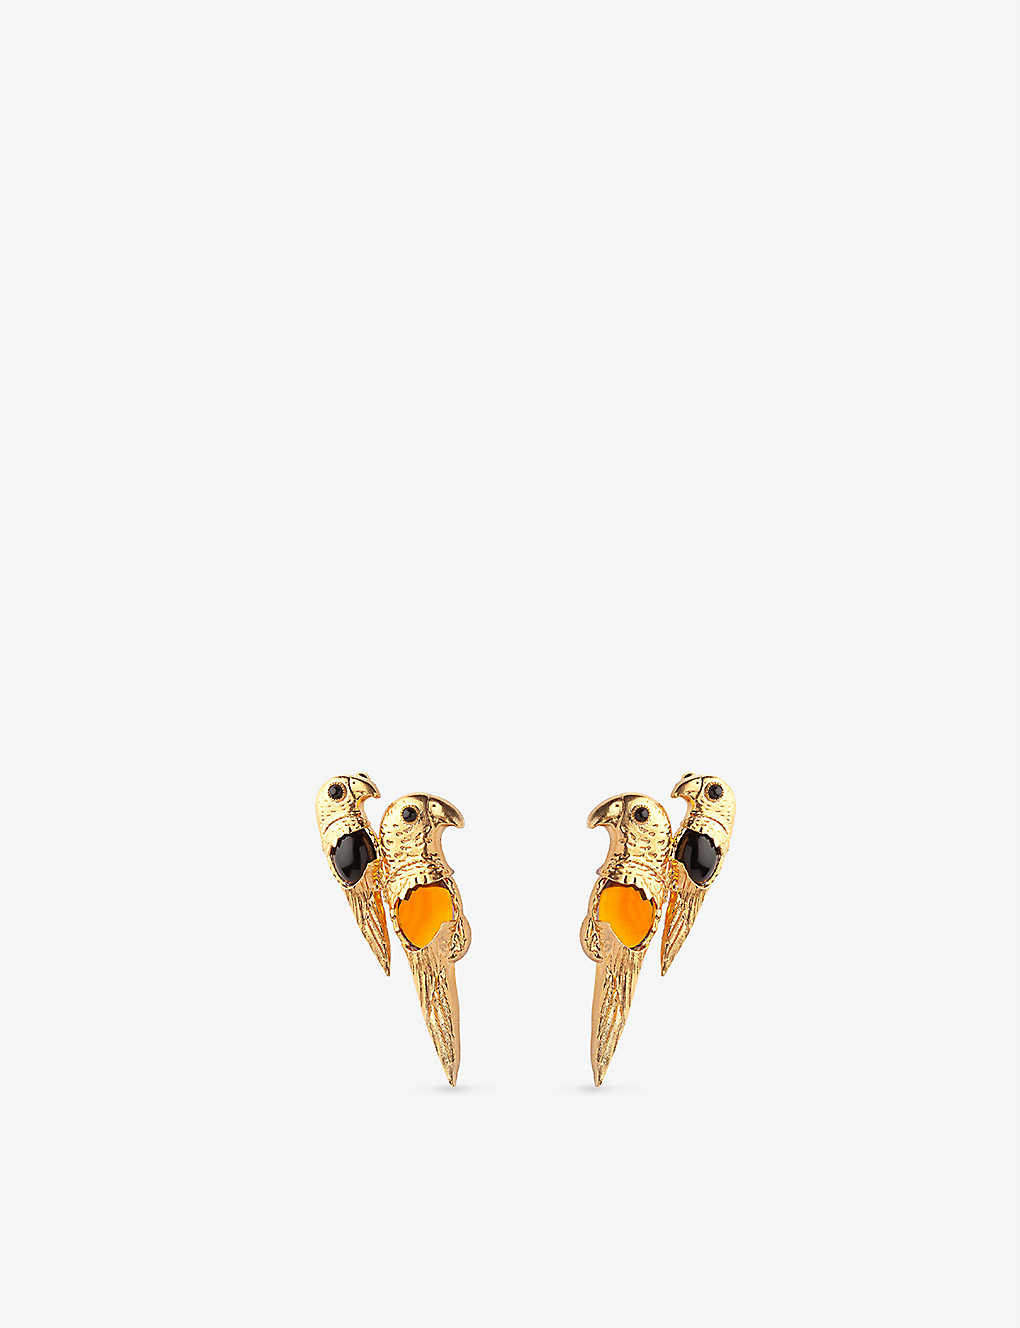 La Maison Couture Sonia Petroff Parrot 24ct Yellow Gold-plated Brass, Topaz And Onyx Earrings